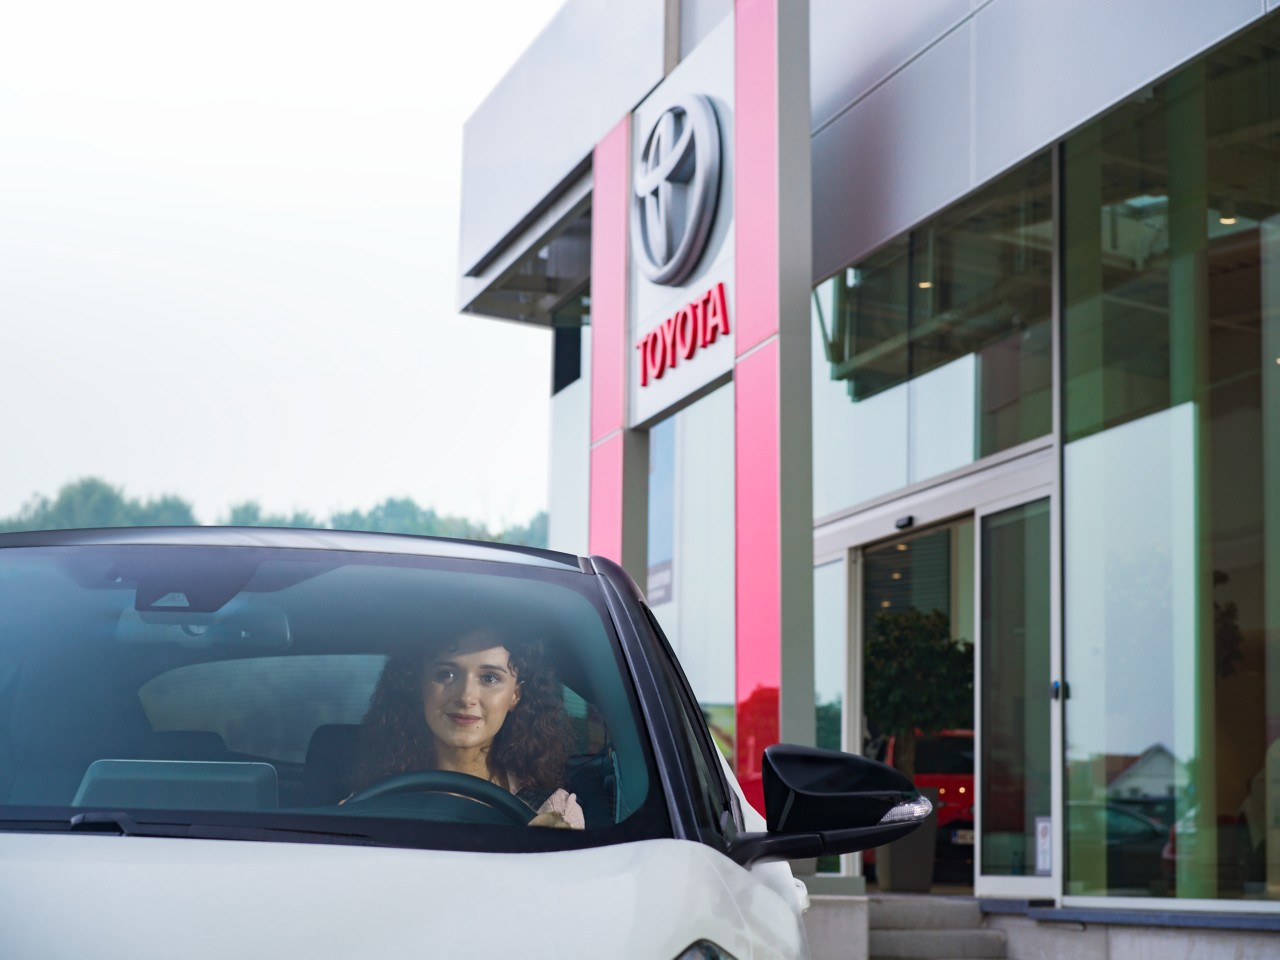 Woman driving away from Toyota Dealership